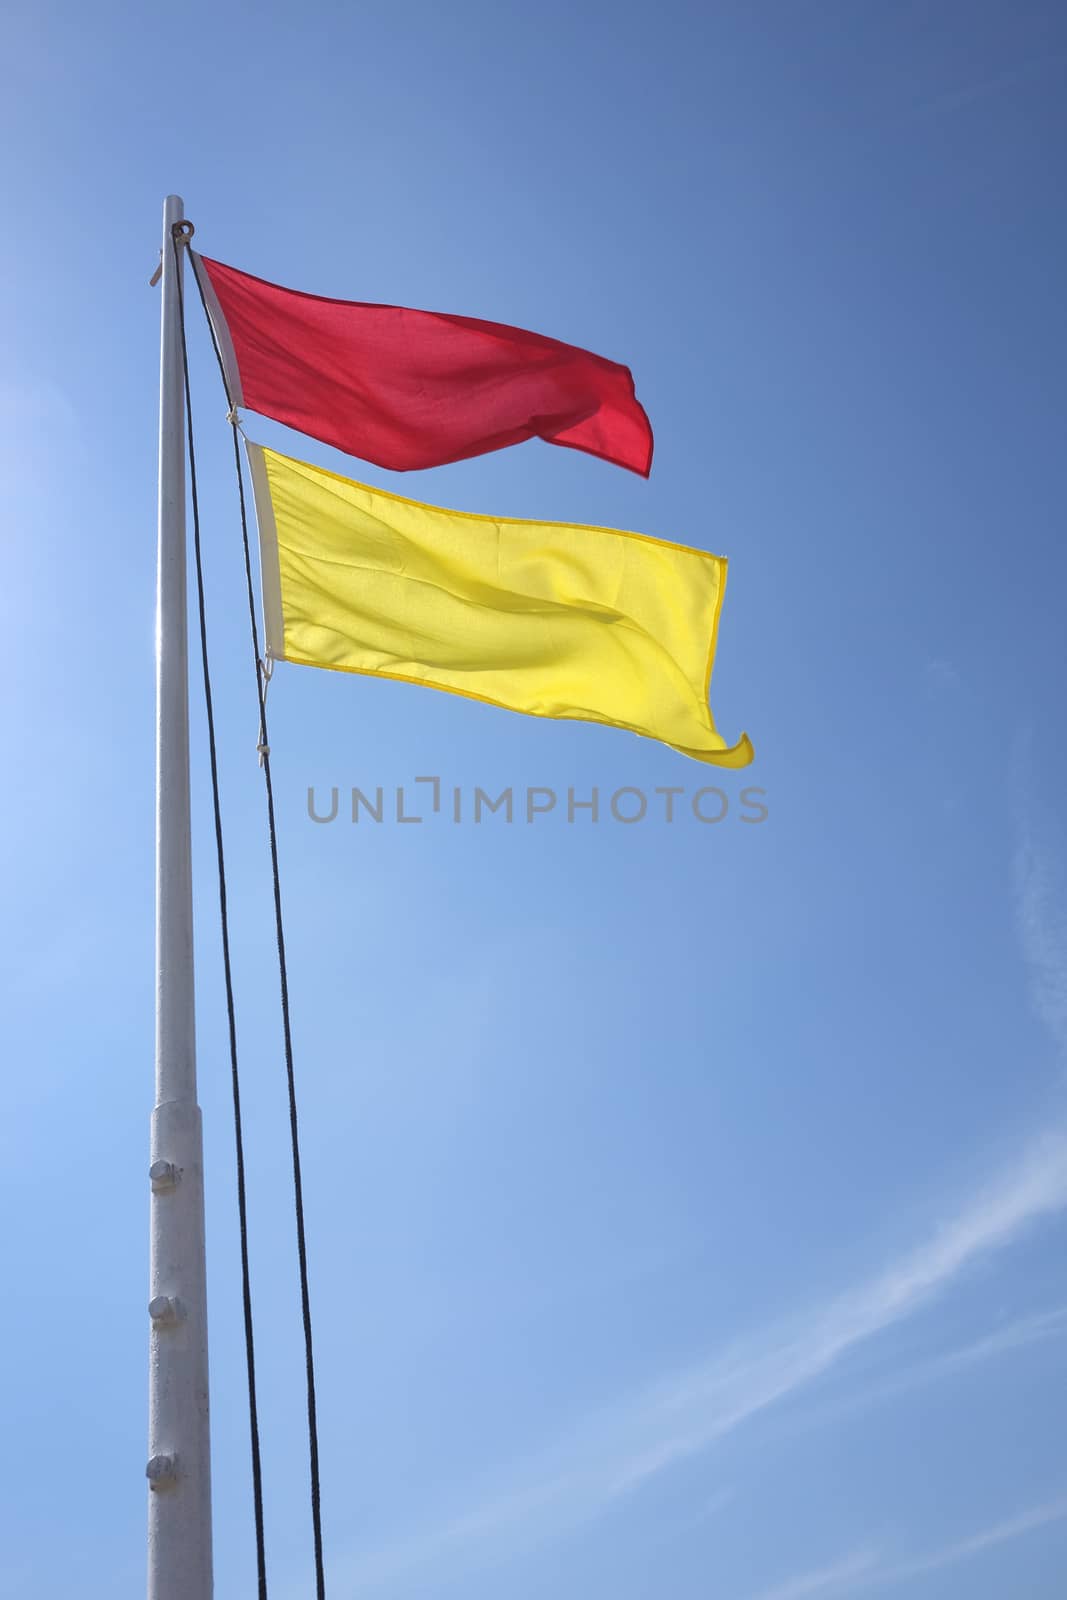 red and yellow safe bathing area flag against blue sky